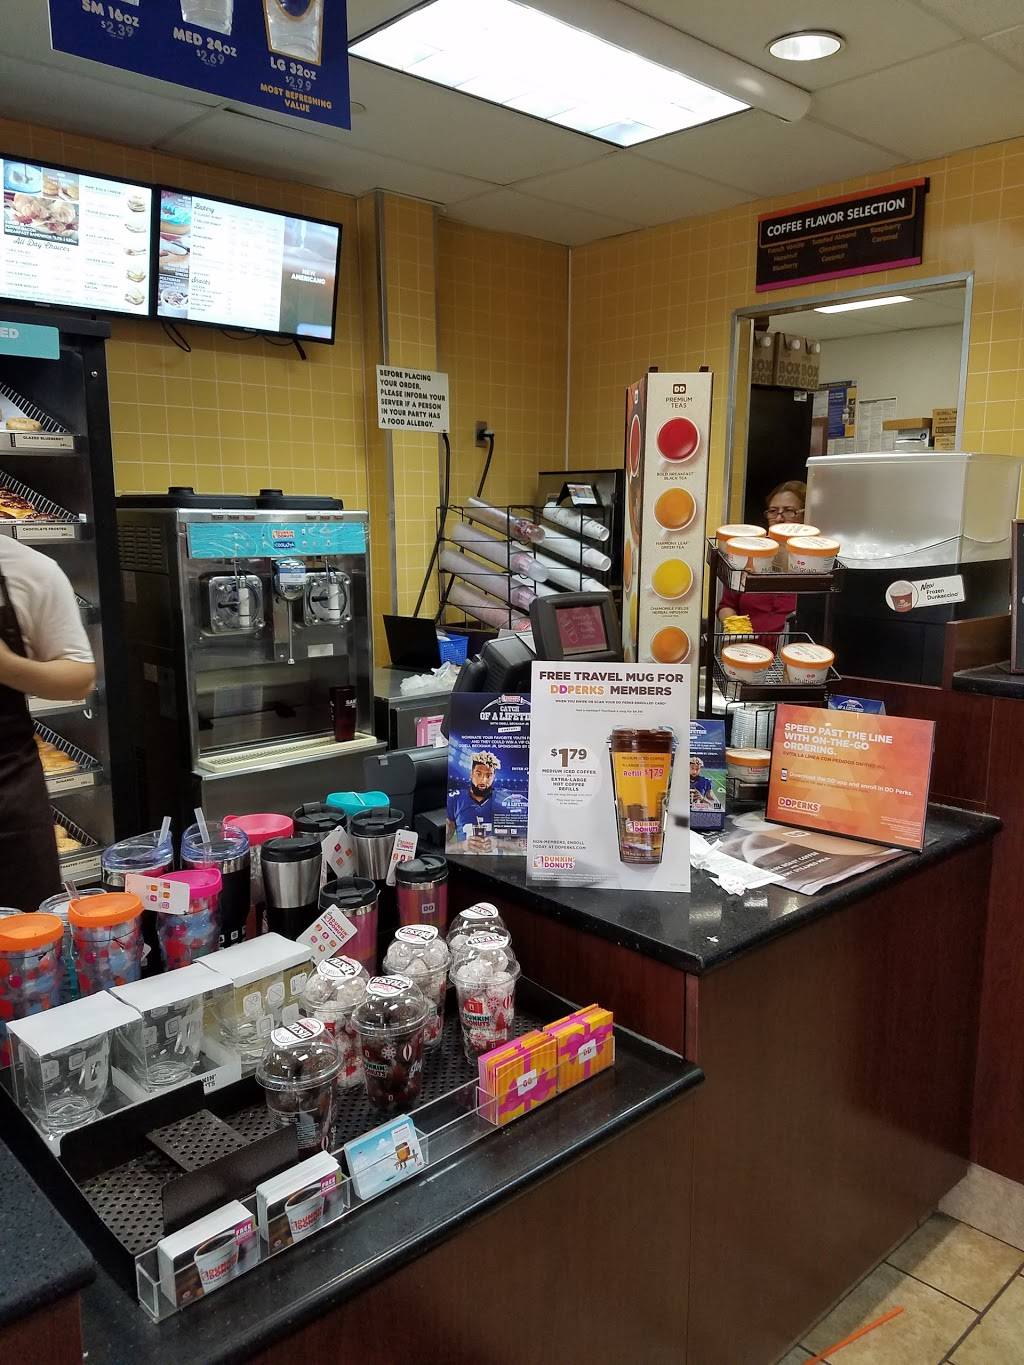 Dunkin Donuts | cafe | 2000 Bergenline Ave, Union City, NJ 07087, USA | 2013301616 OR +1 201-330-1616